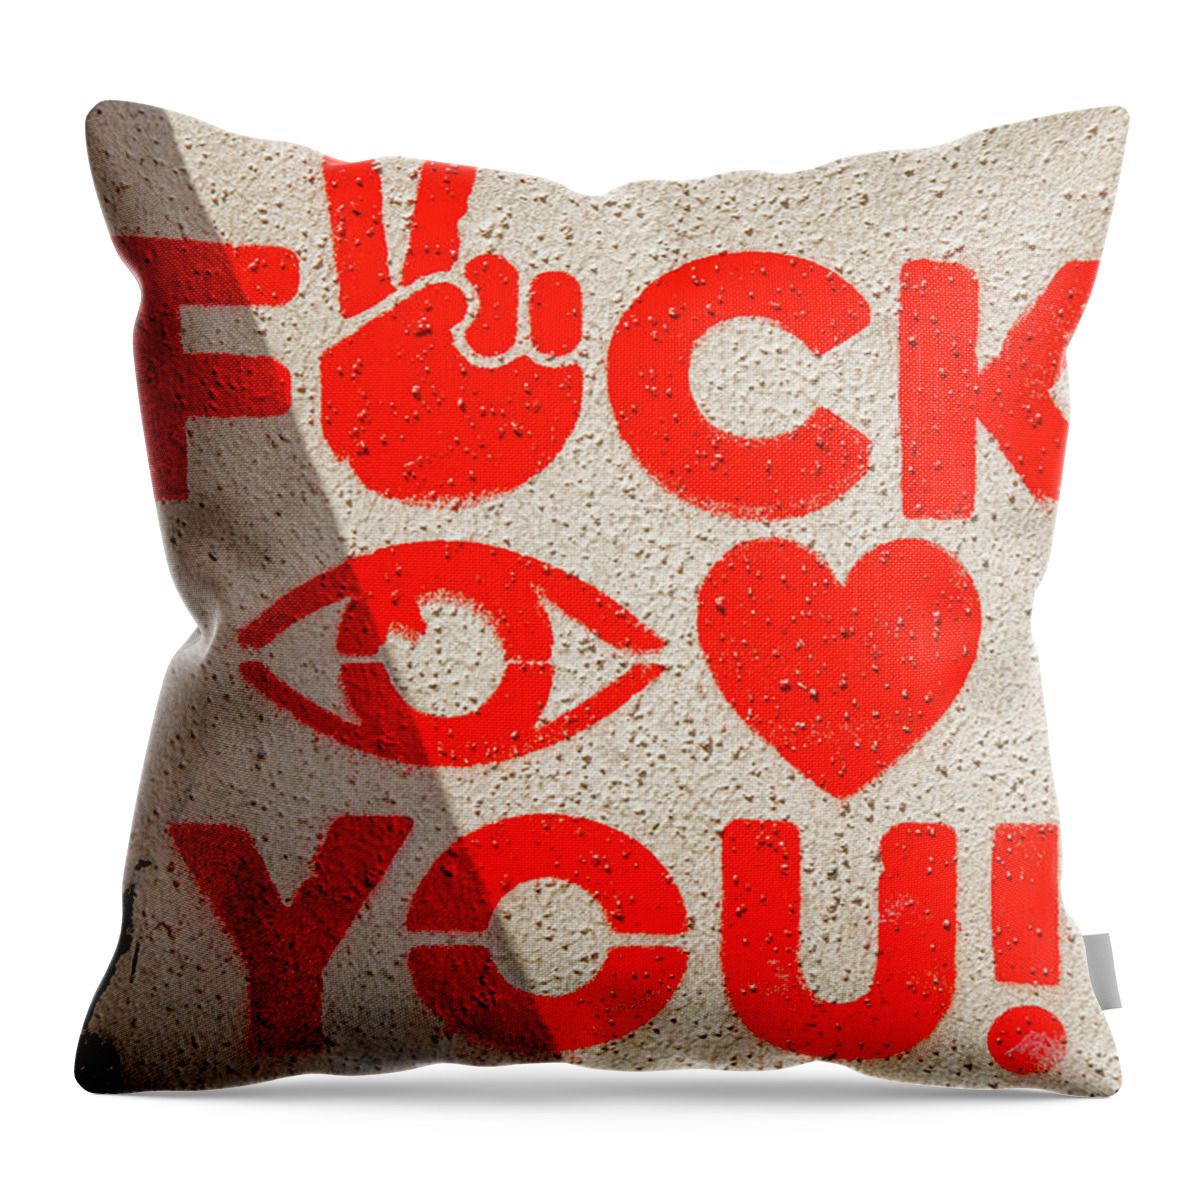 Fuck You Throw Pillow featuring the photograph Fuck You by Rocco Silvestri